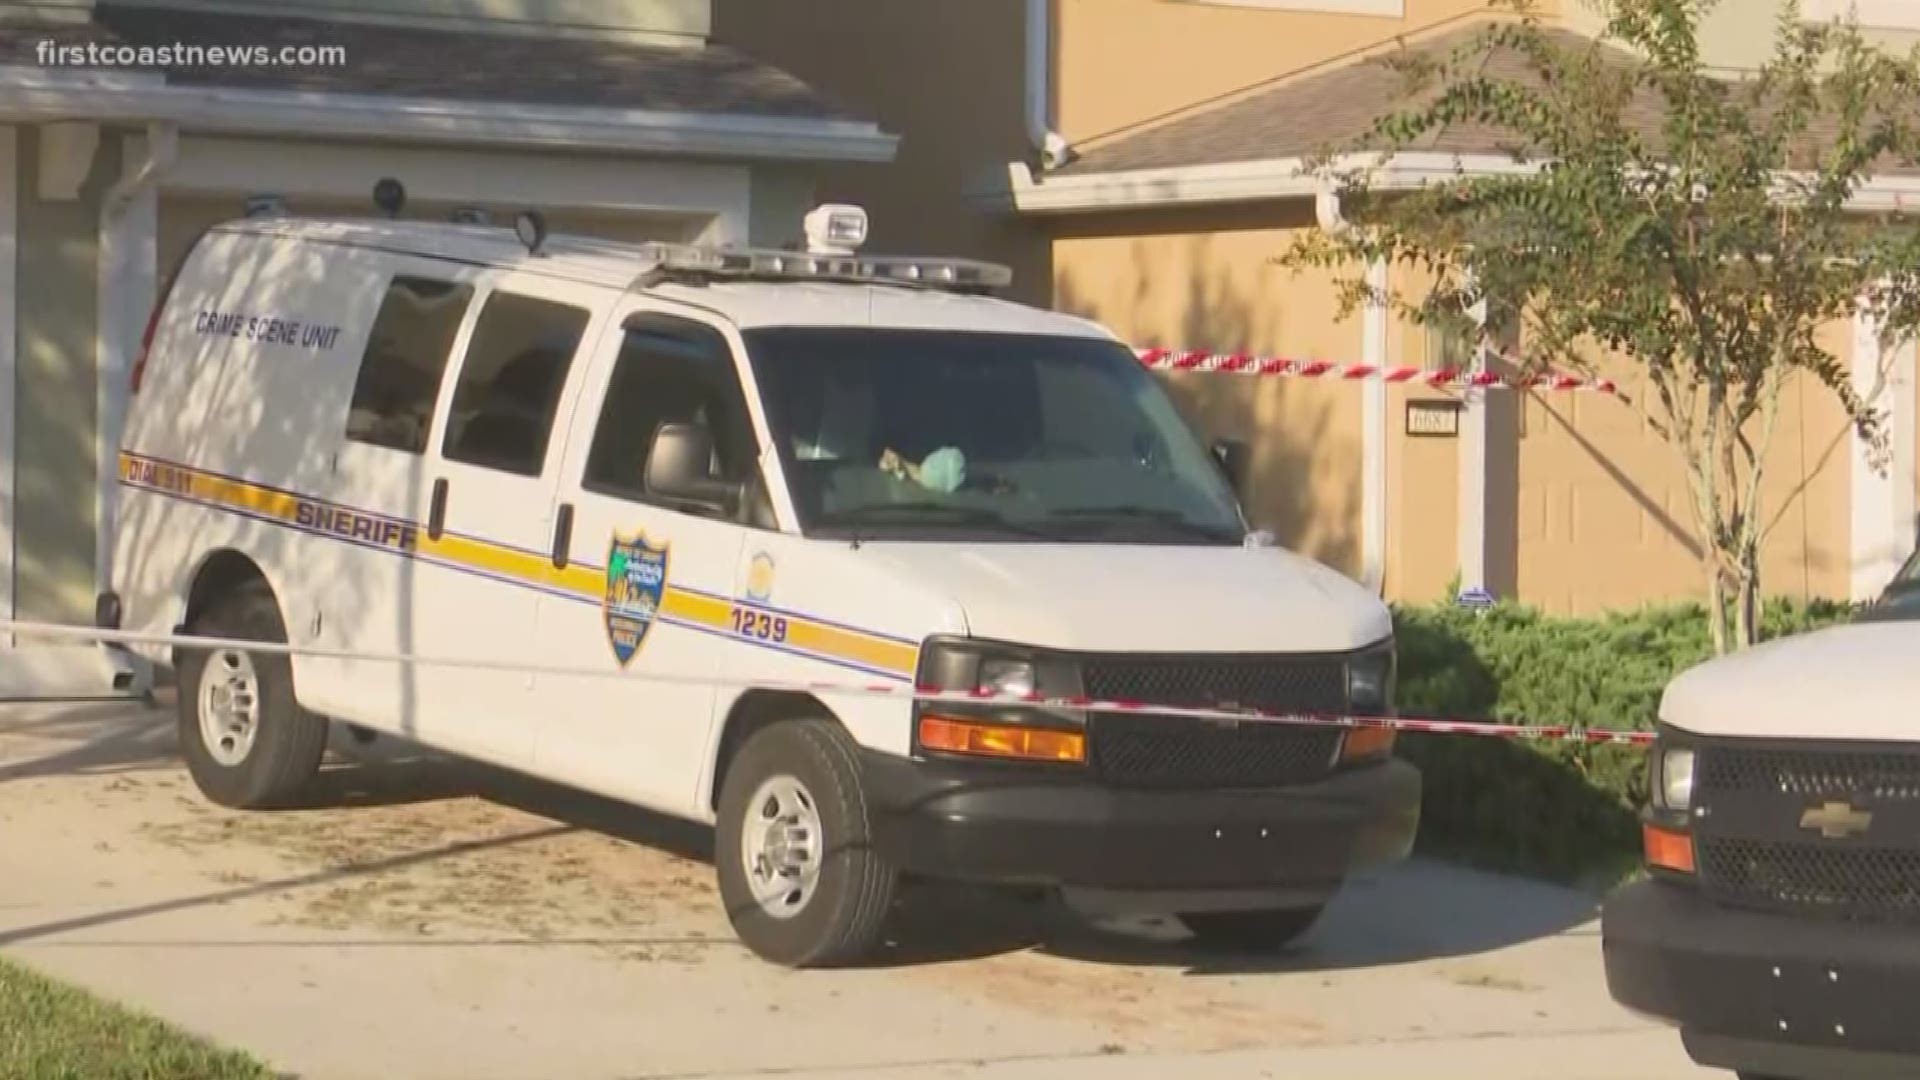 A woman was found dead inside a home in Bartram Park Monday after the Jacksonville Sheriff's Office says a man from Daytona claimed to have killed a woman in Duval County.